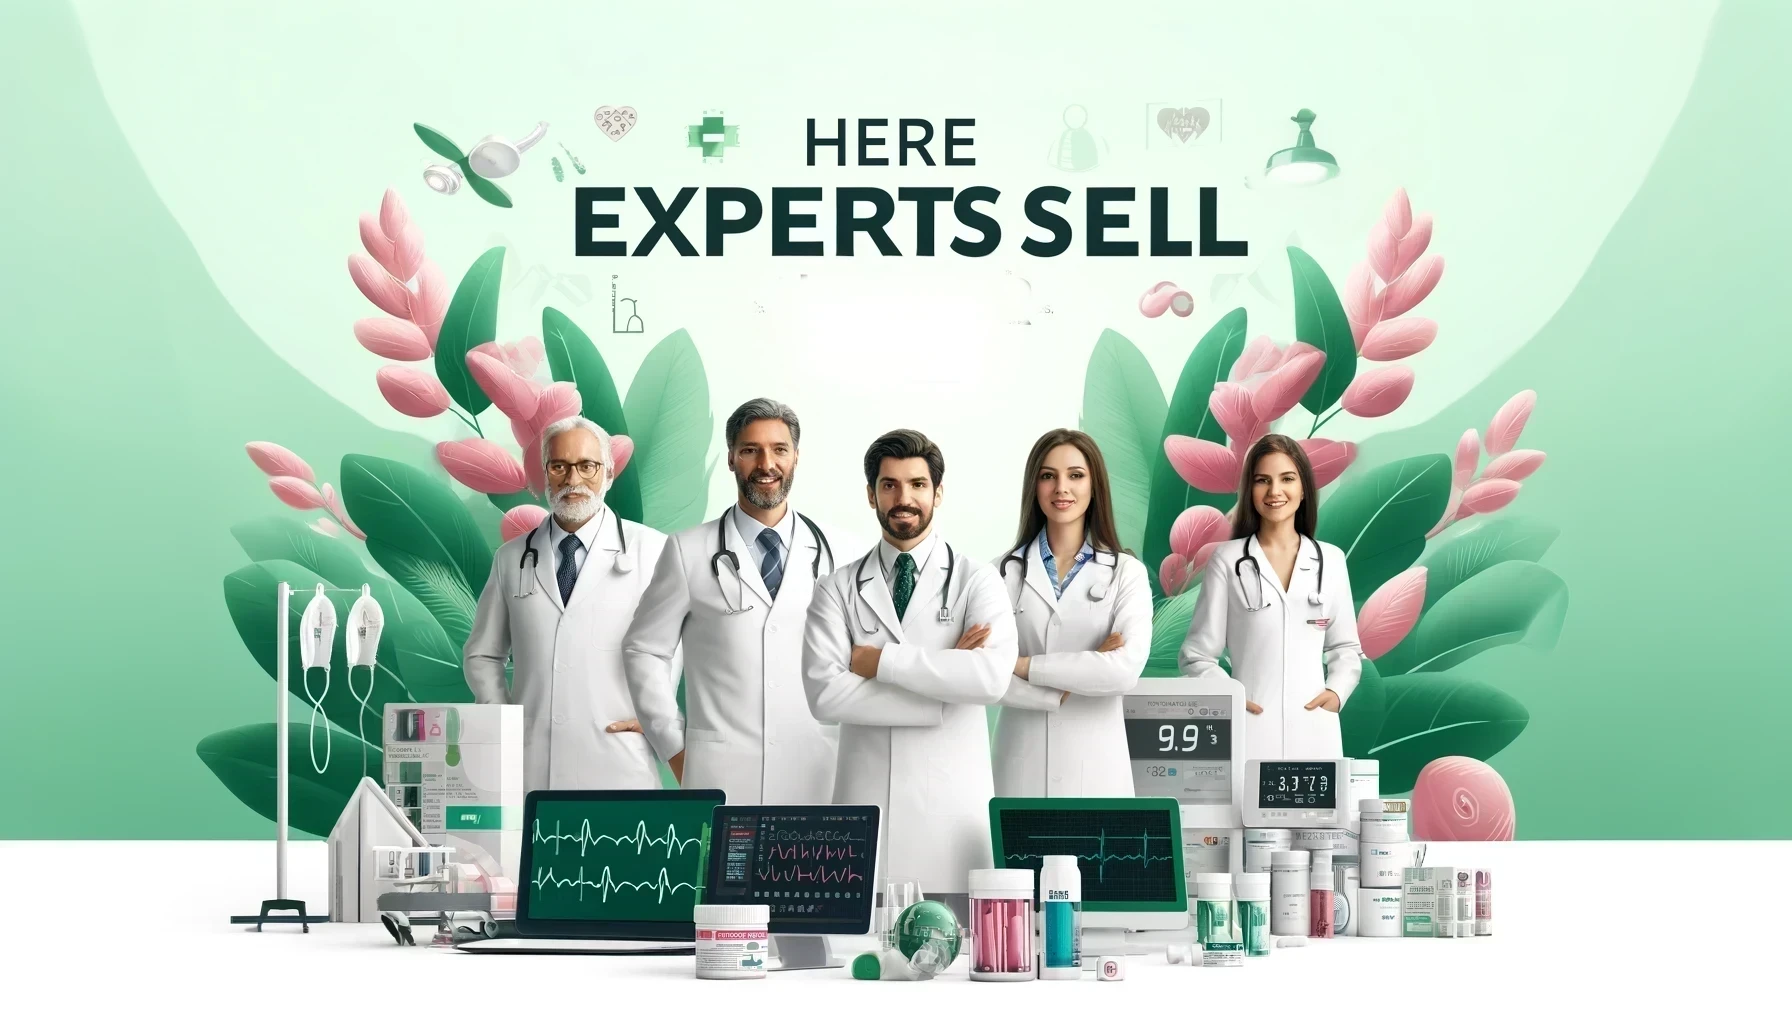 Buy from experts